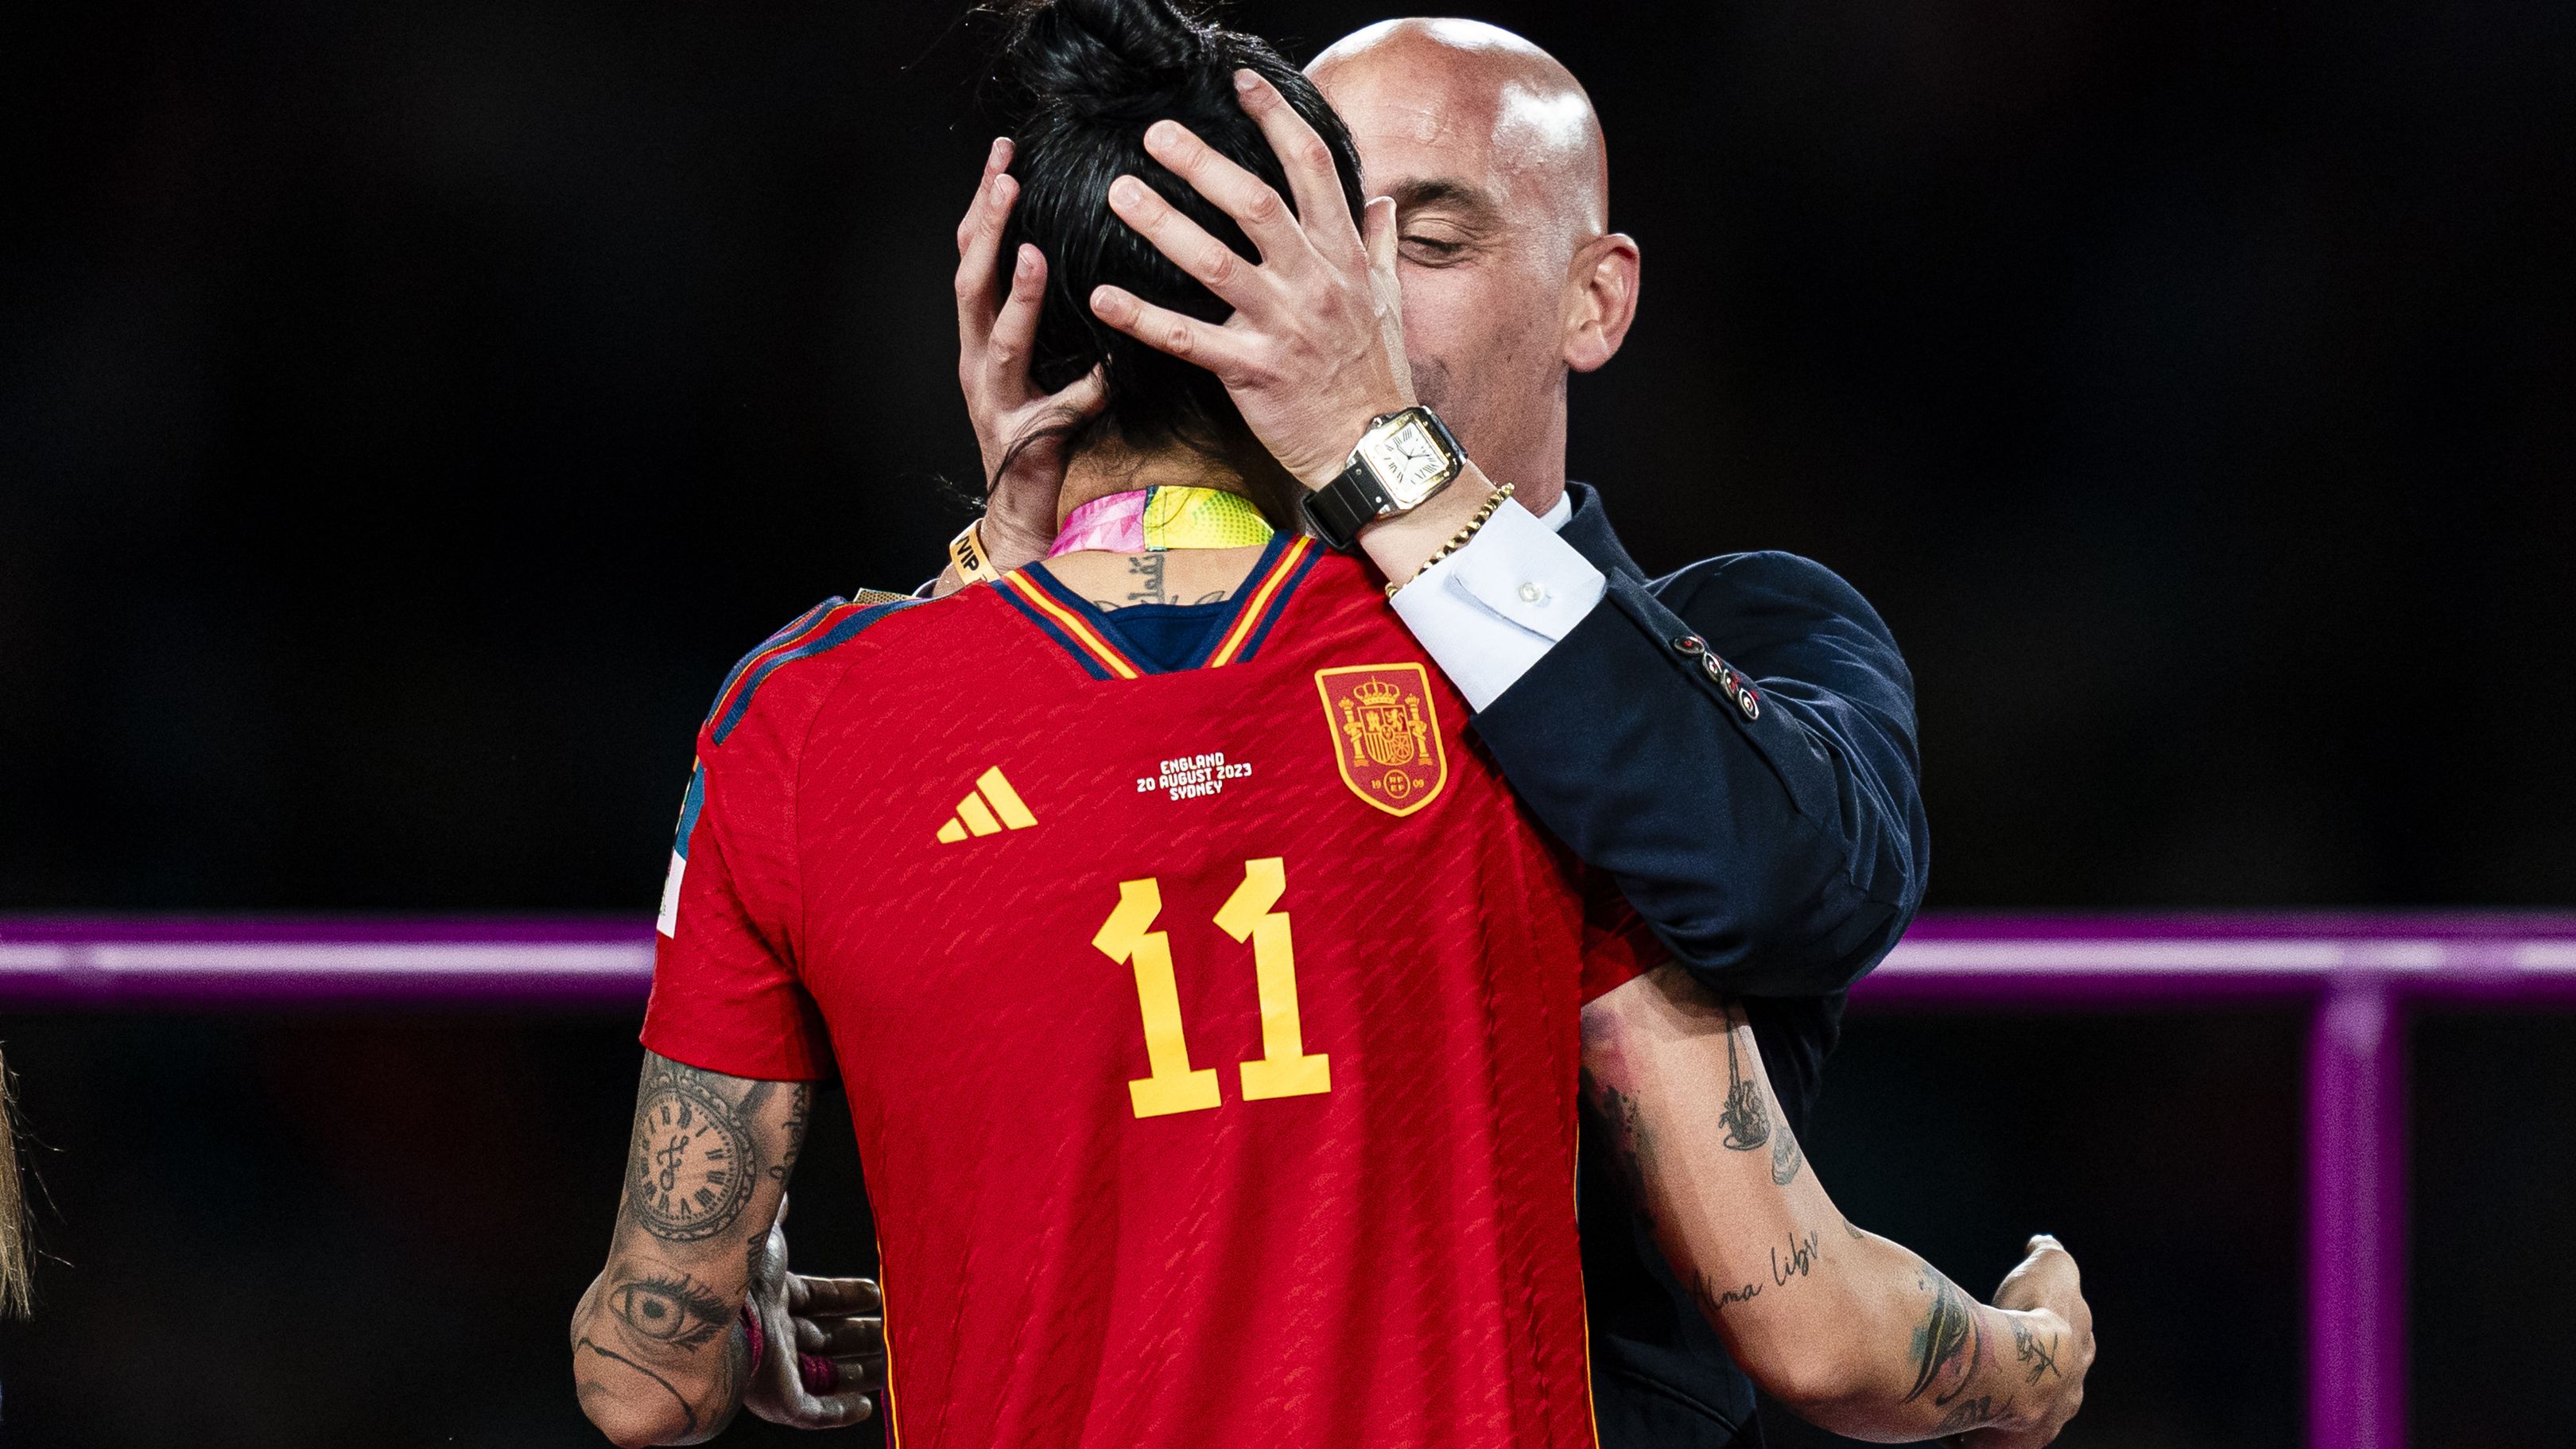 Luis Rubiales kisses Jennifer Hermoso during the medal ceremony.